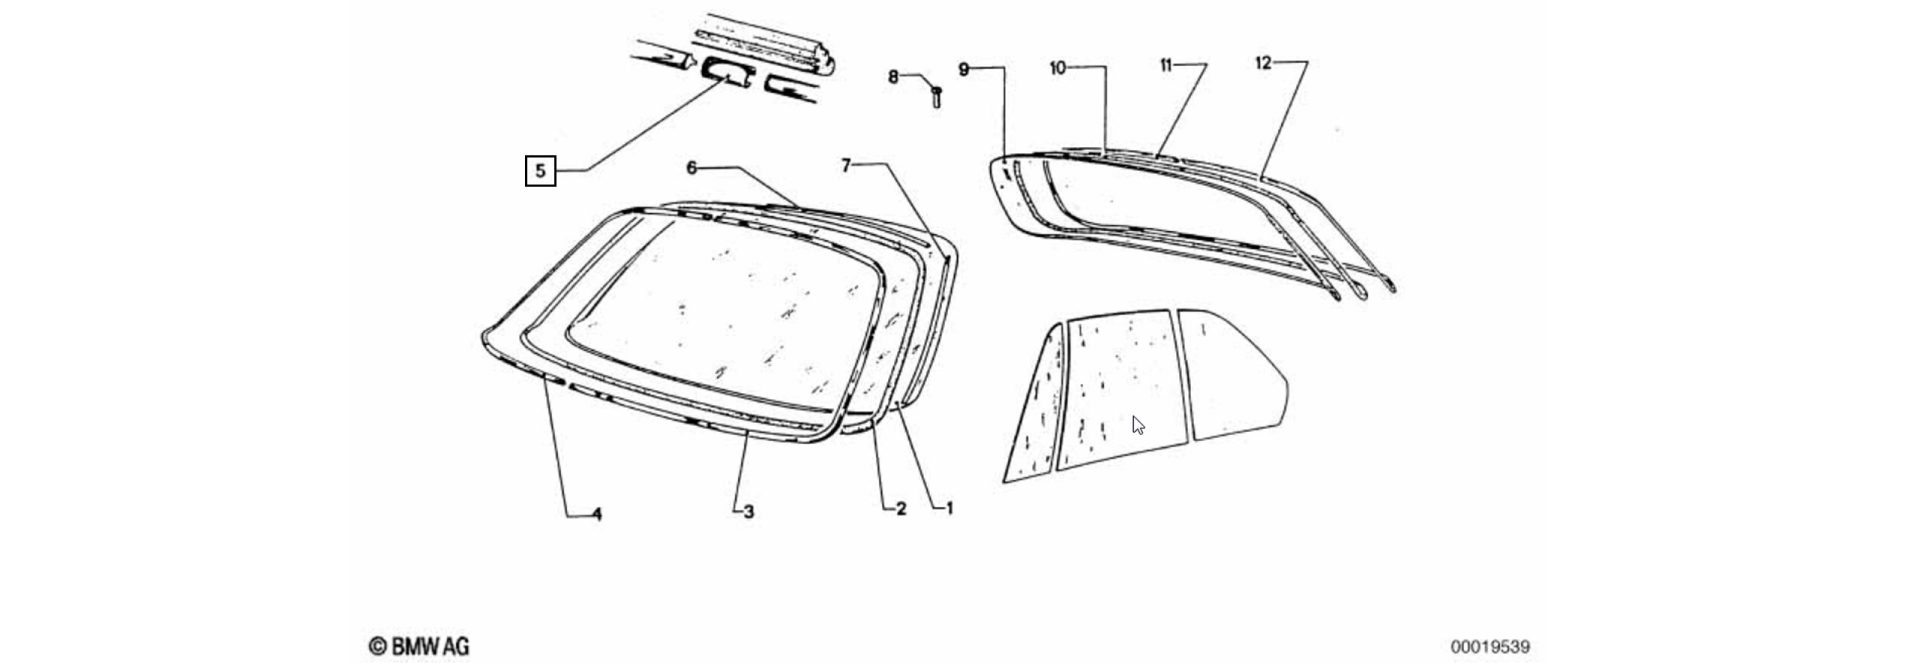 Cup for decorative frame exploded-view drawing